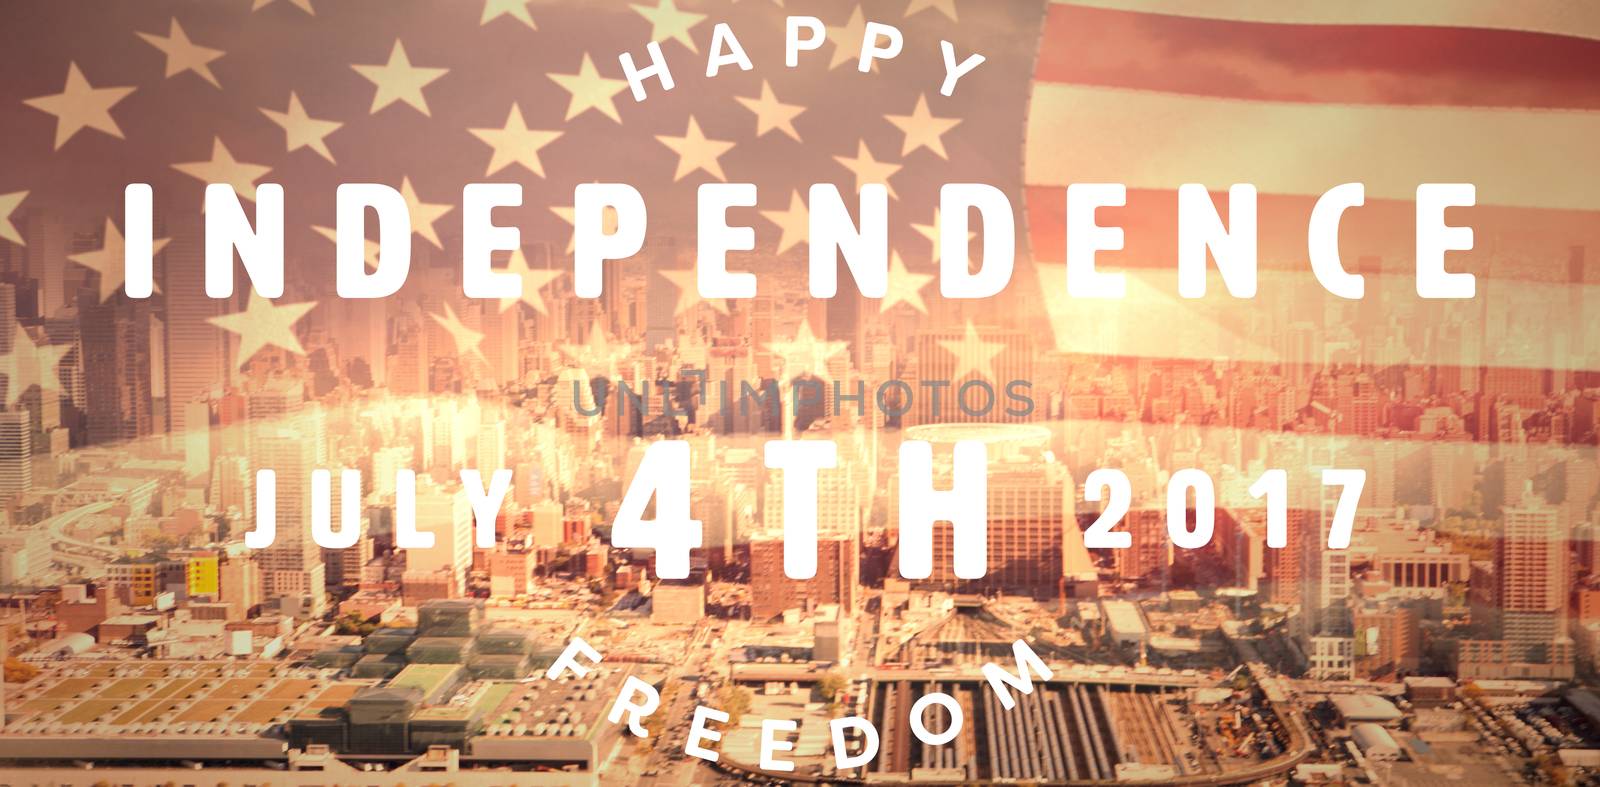 Computer graphic image of happy 4th of july text against united states of america flag